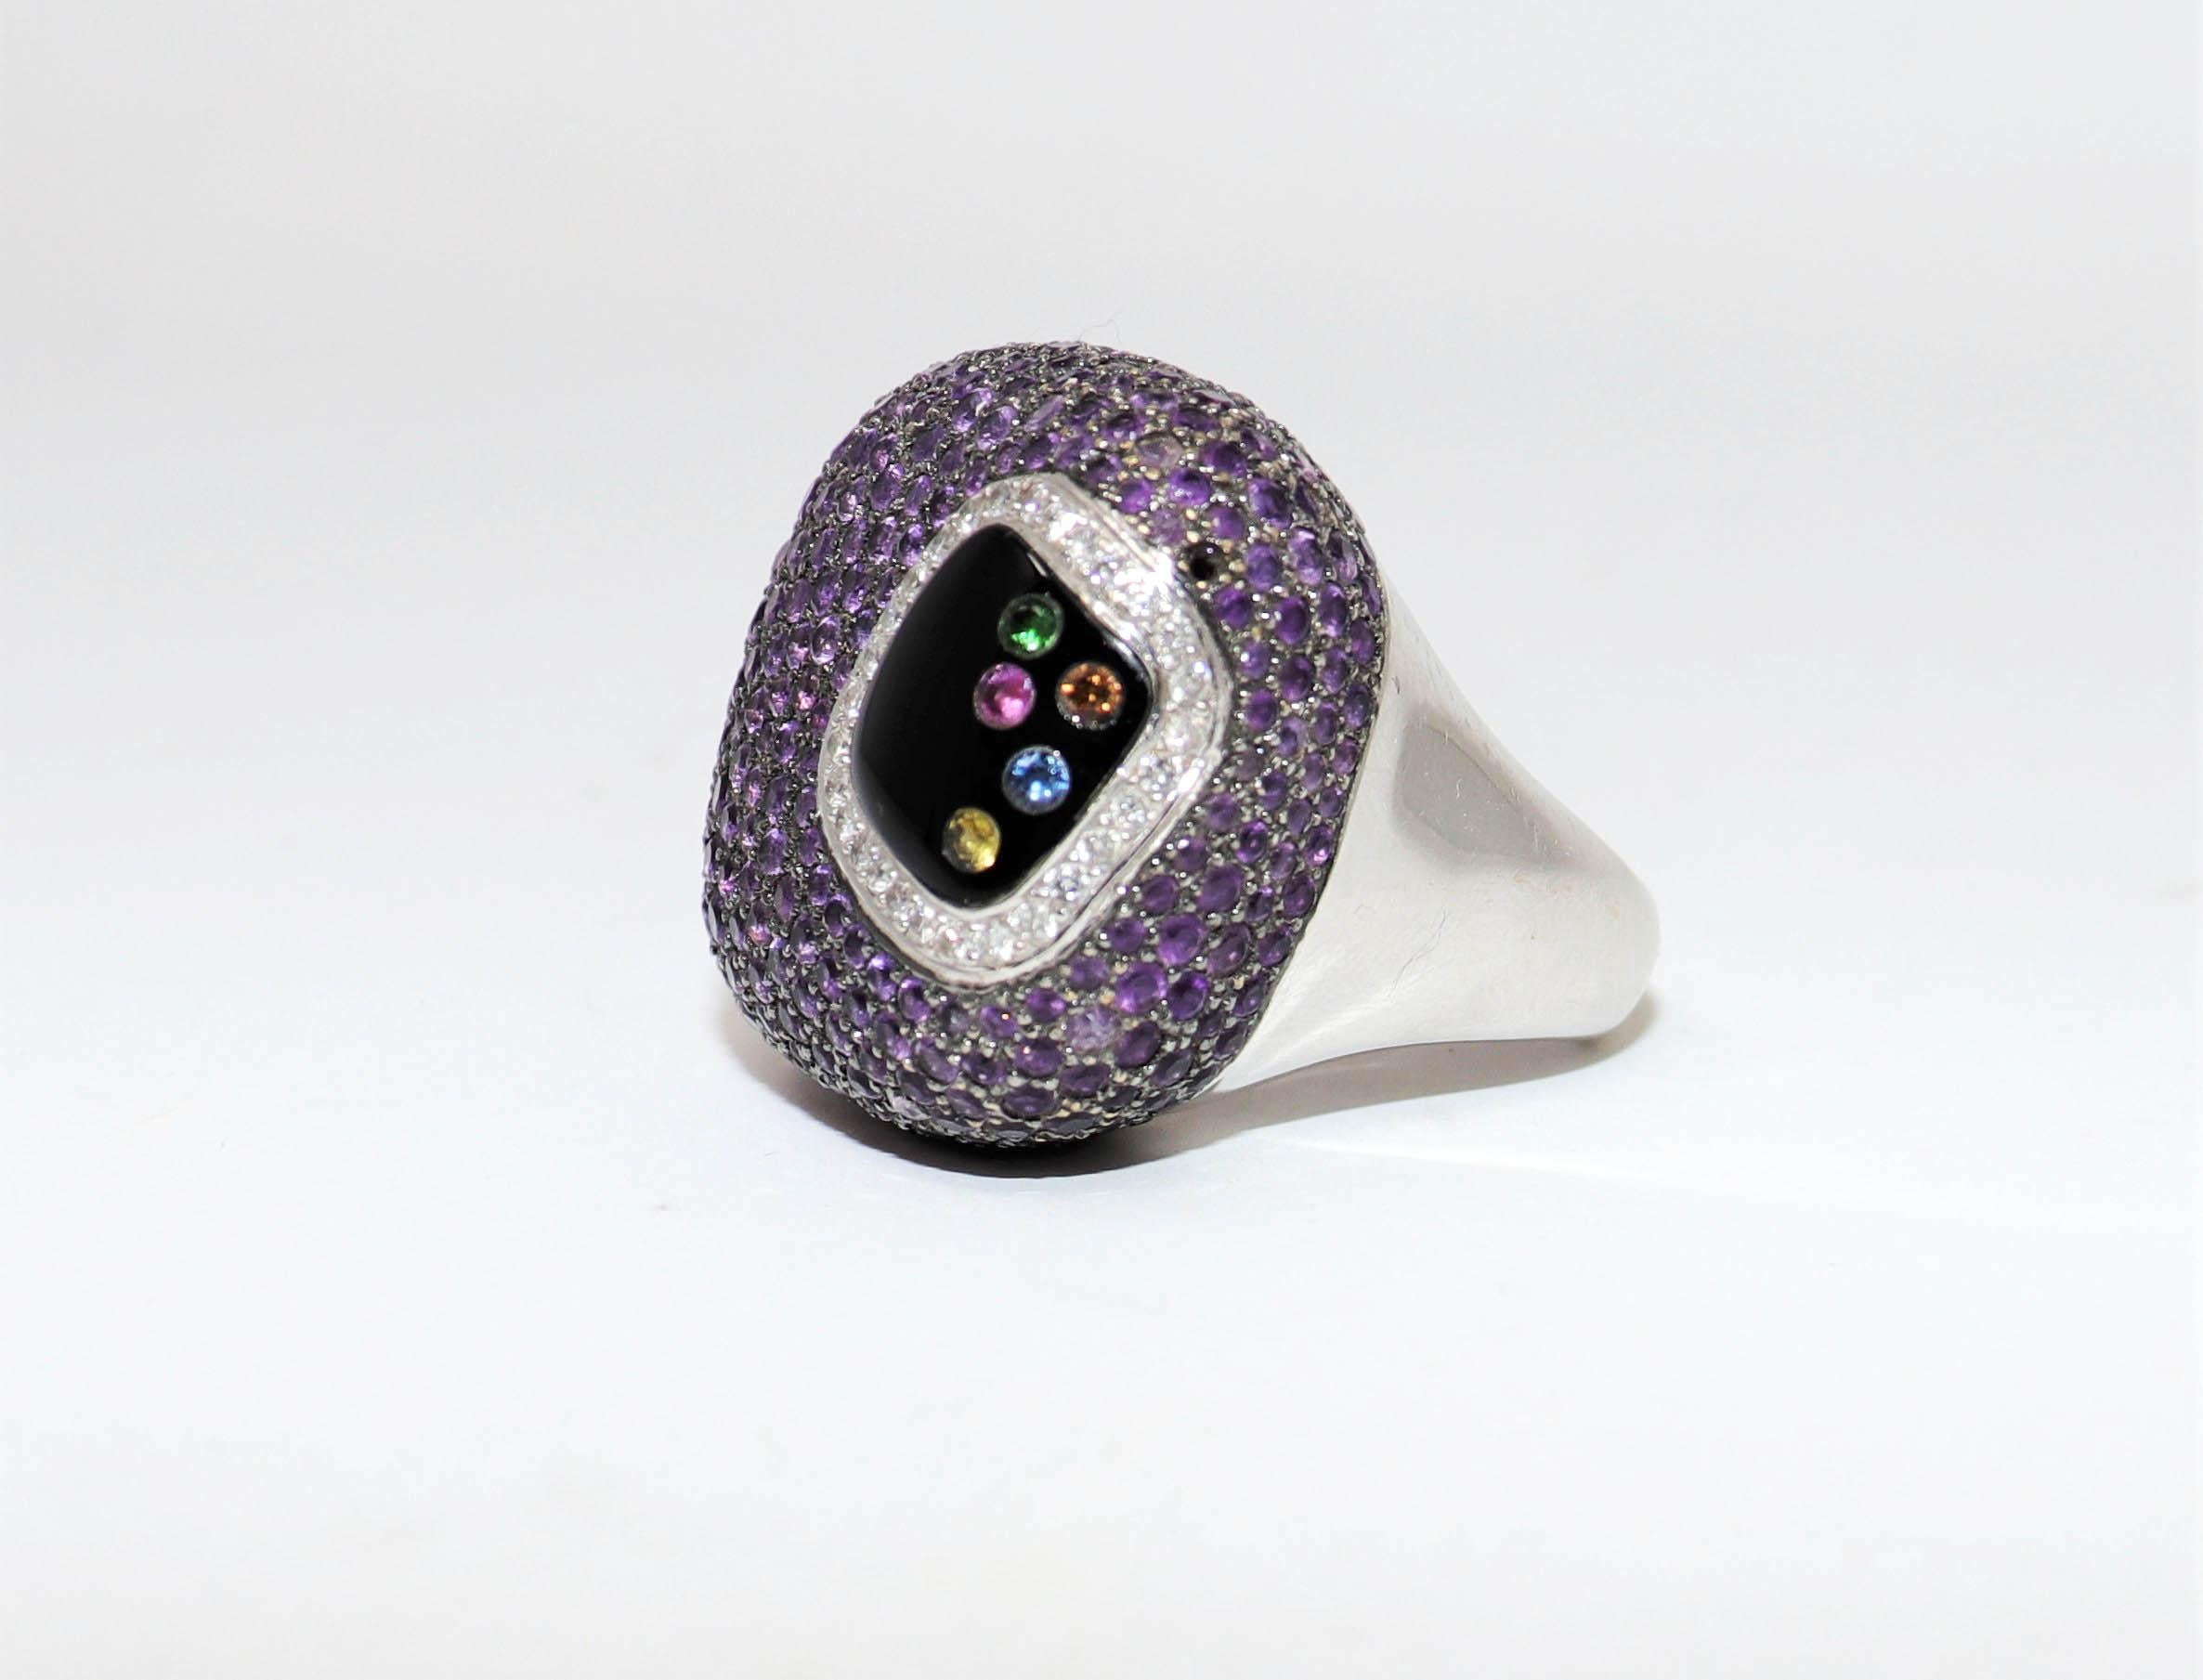 Ring size: 7

If you are looking for a bold, colorful, and sizable statement piece, look no further than this! Absolutely incredible cocktail ring filled from edge to edge with vibrant purple amethysts, assorted gemstones and sparkling diamonds.